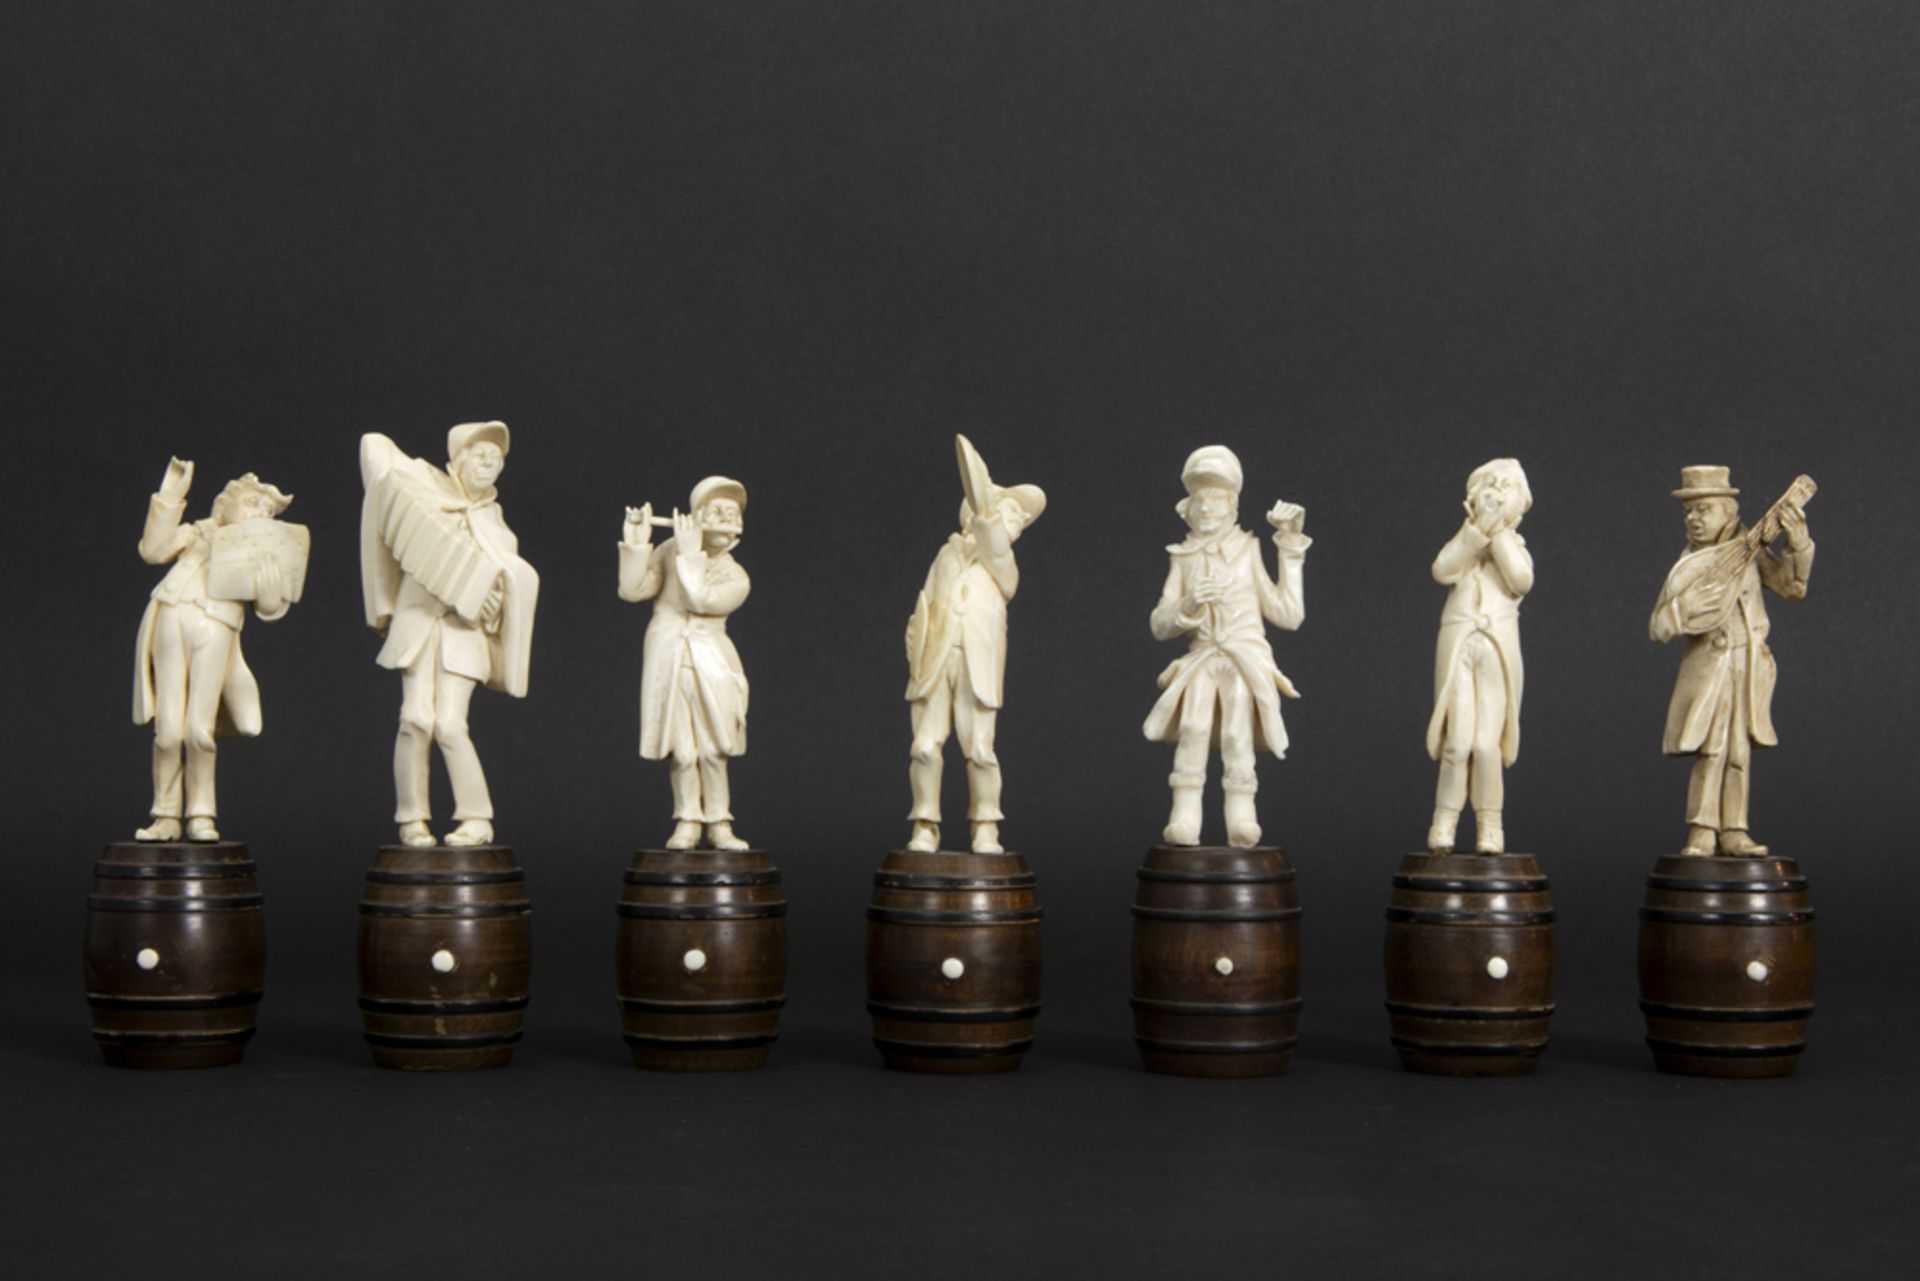 set of seven small antique figures in ivory, each standing on a wooden barrel - depicting a band - Image 2 of 6